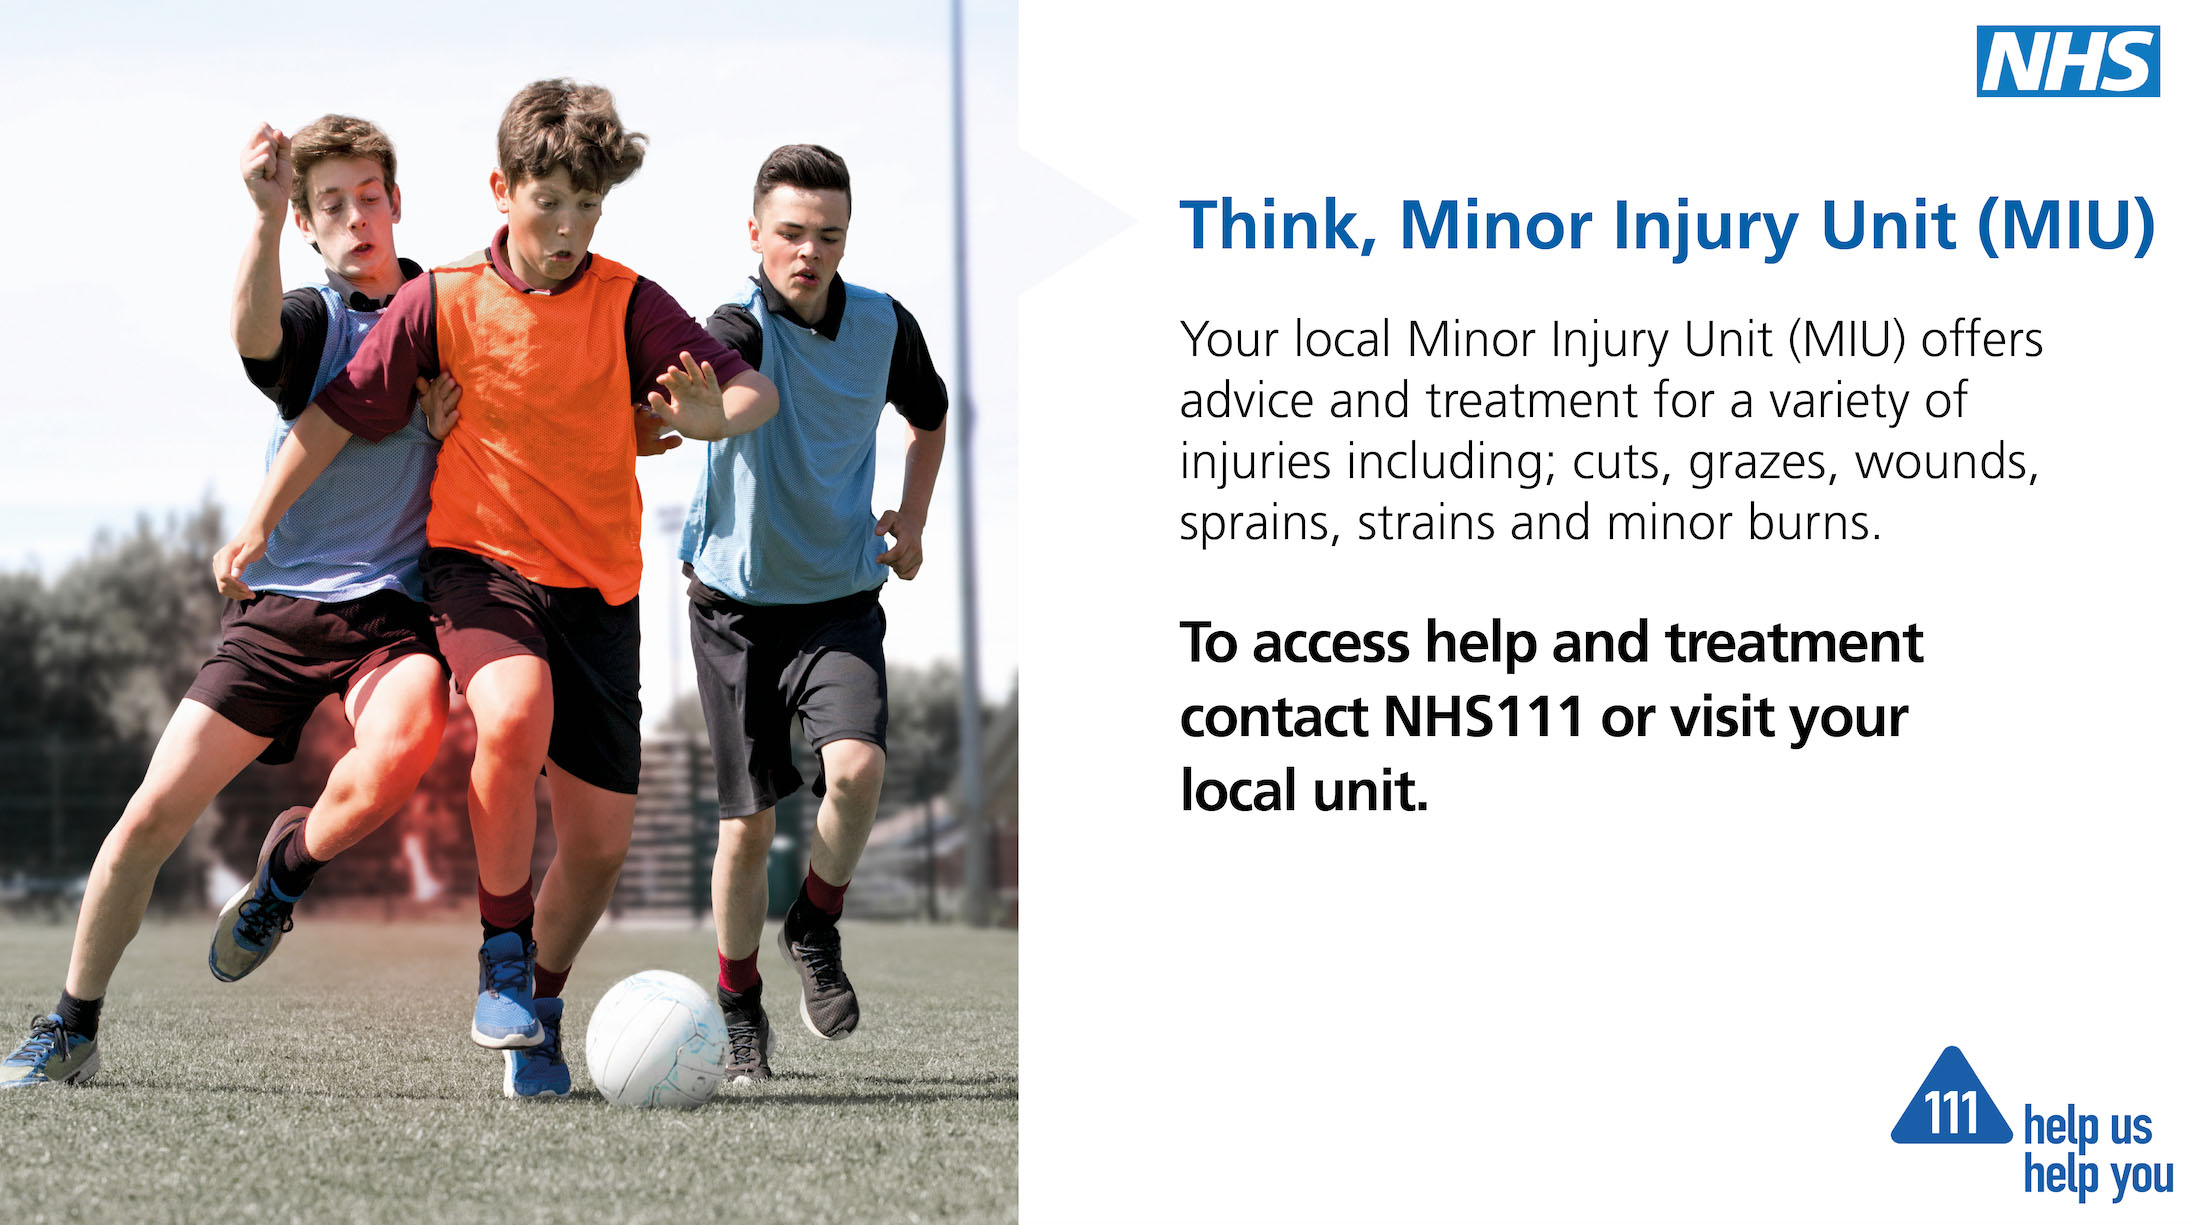 Your local Minor Injuries Unit (MIU) offers advice and treatment for a variety of injuries. To access help and treatment contact NHS111 or visit your local unit. 